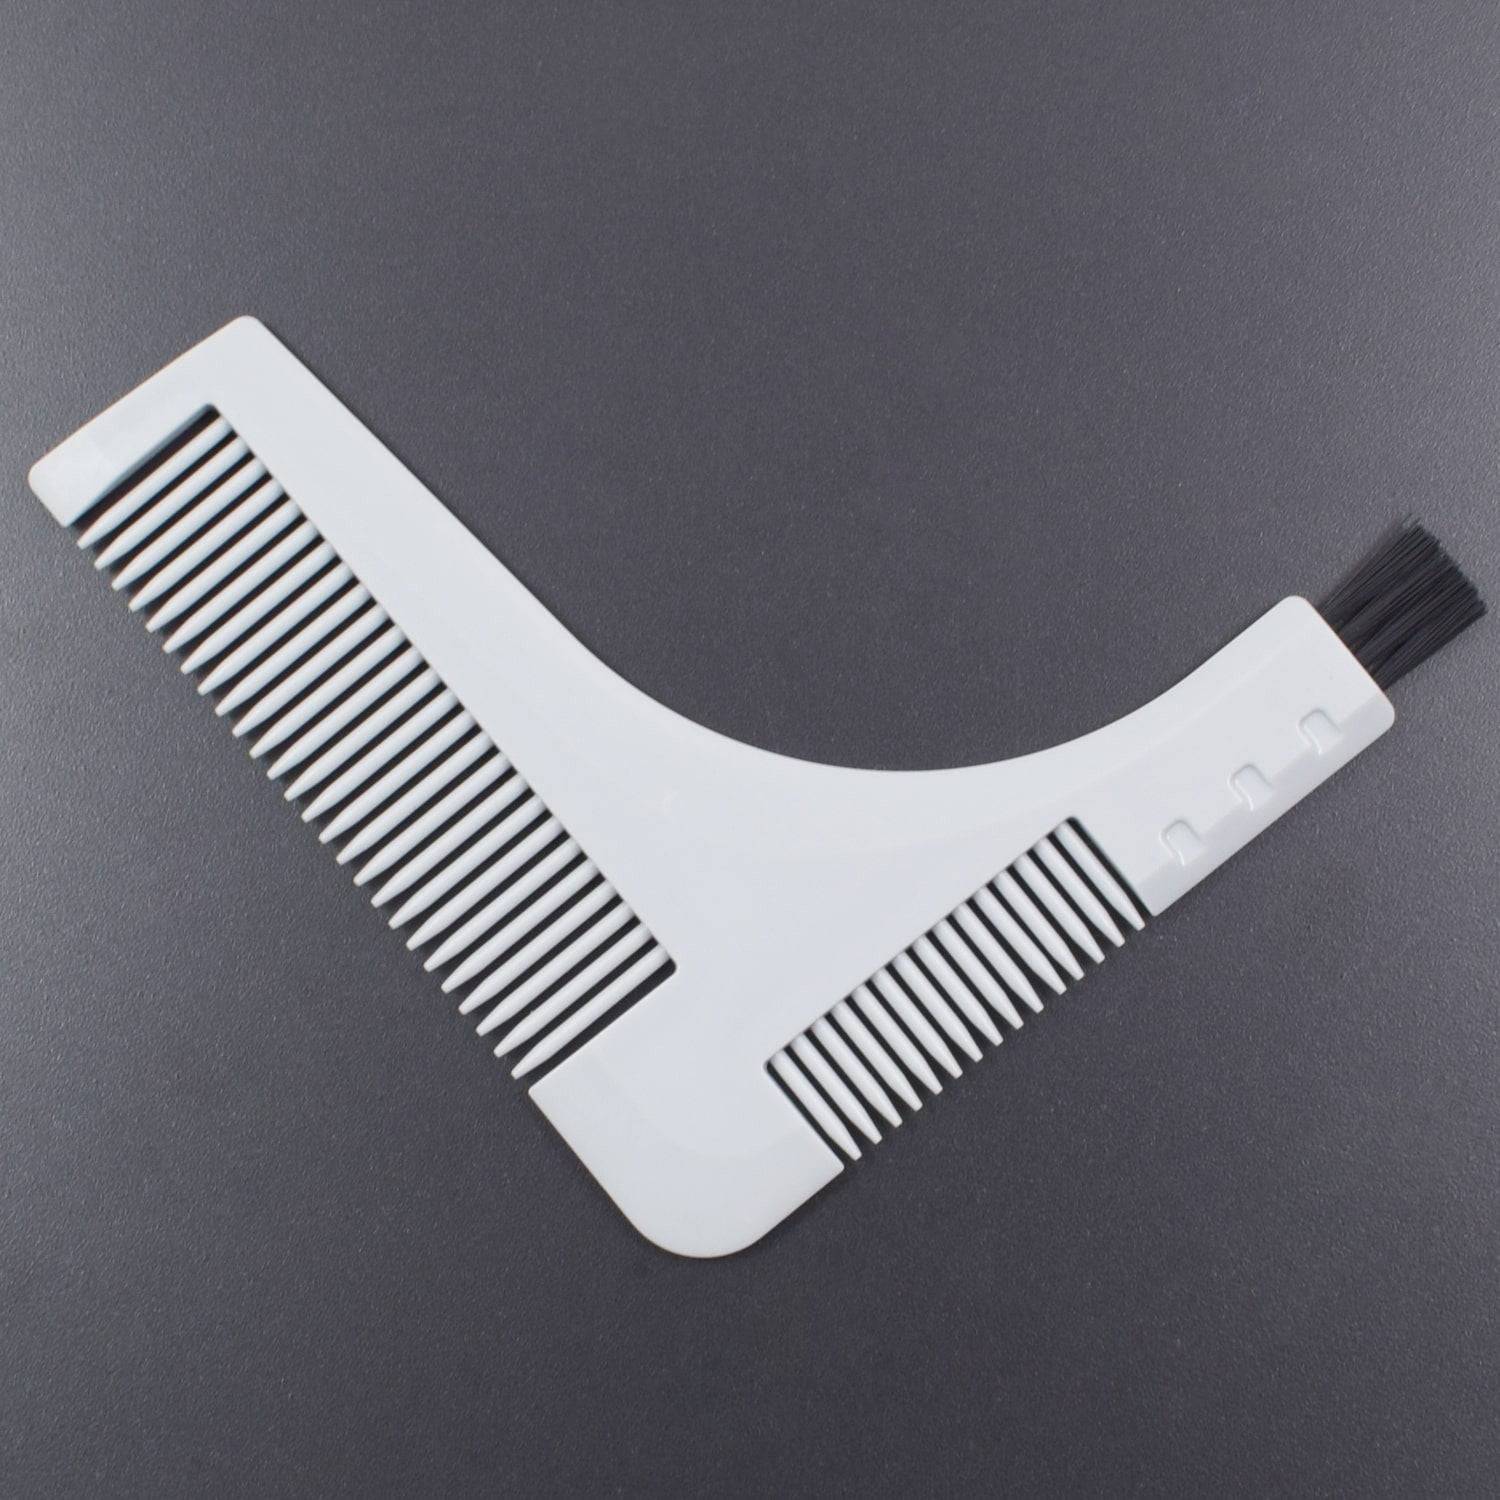 Beard Comb For Shaping And Styling-Premium Quality Beard Template With Inbuilt Comb (Color may vary) - RS1996 - REES52